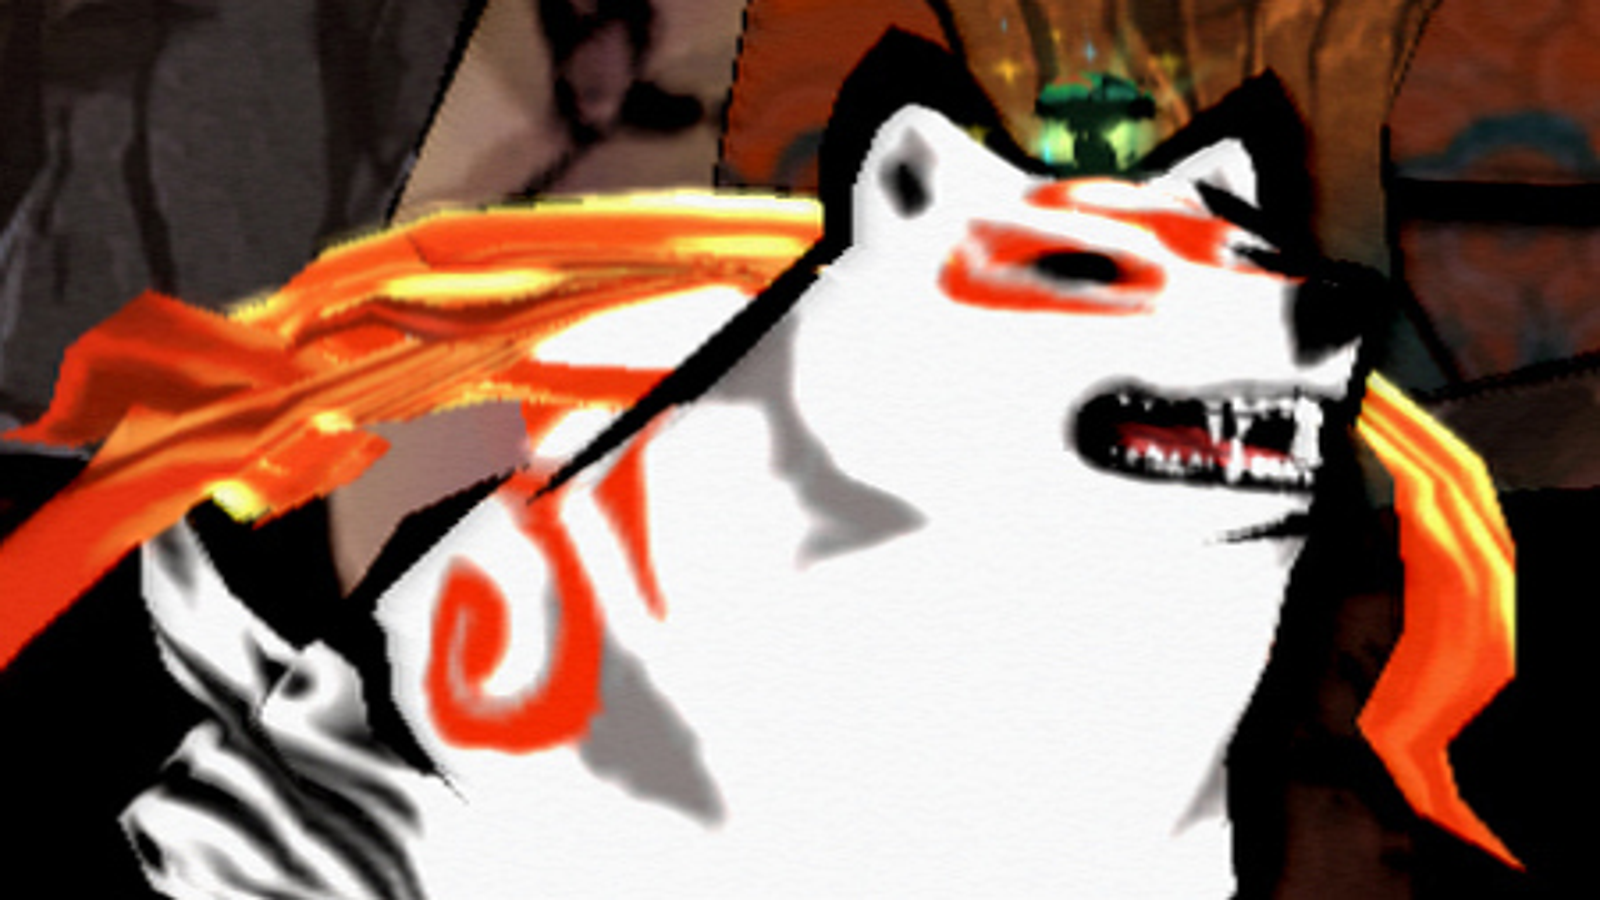 If you ignore Okamiden you're a terrible person (hands-on